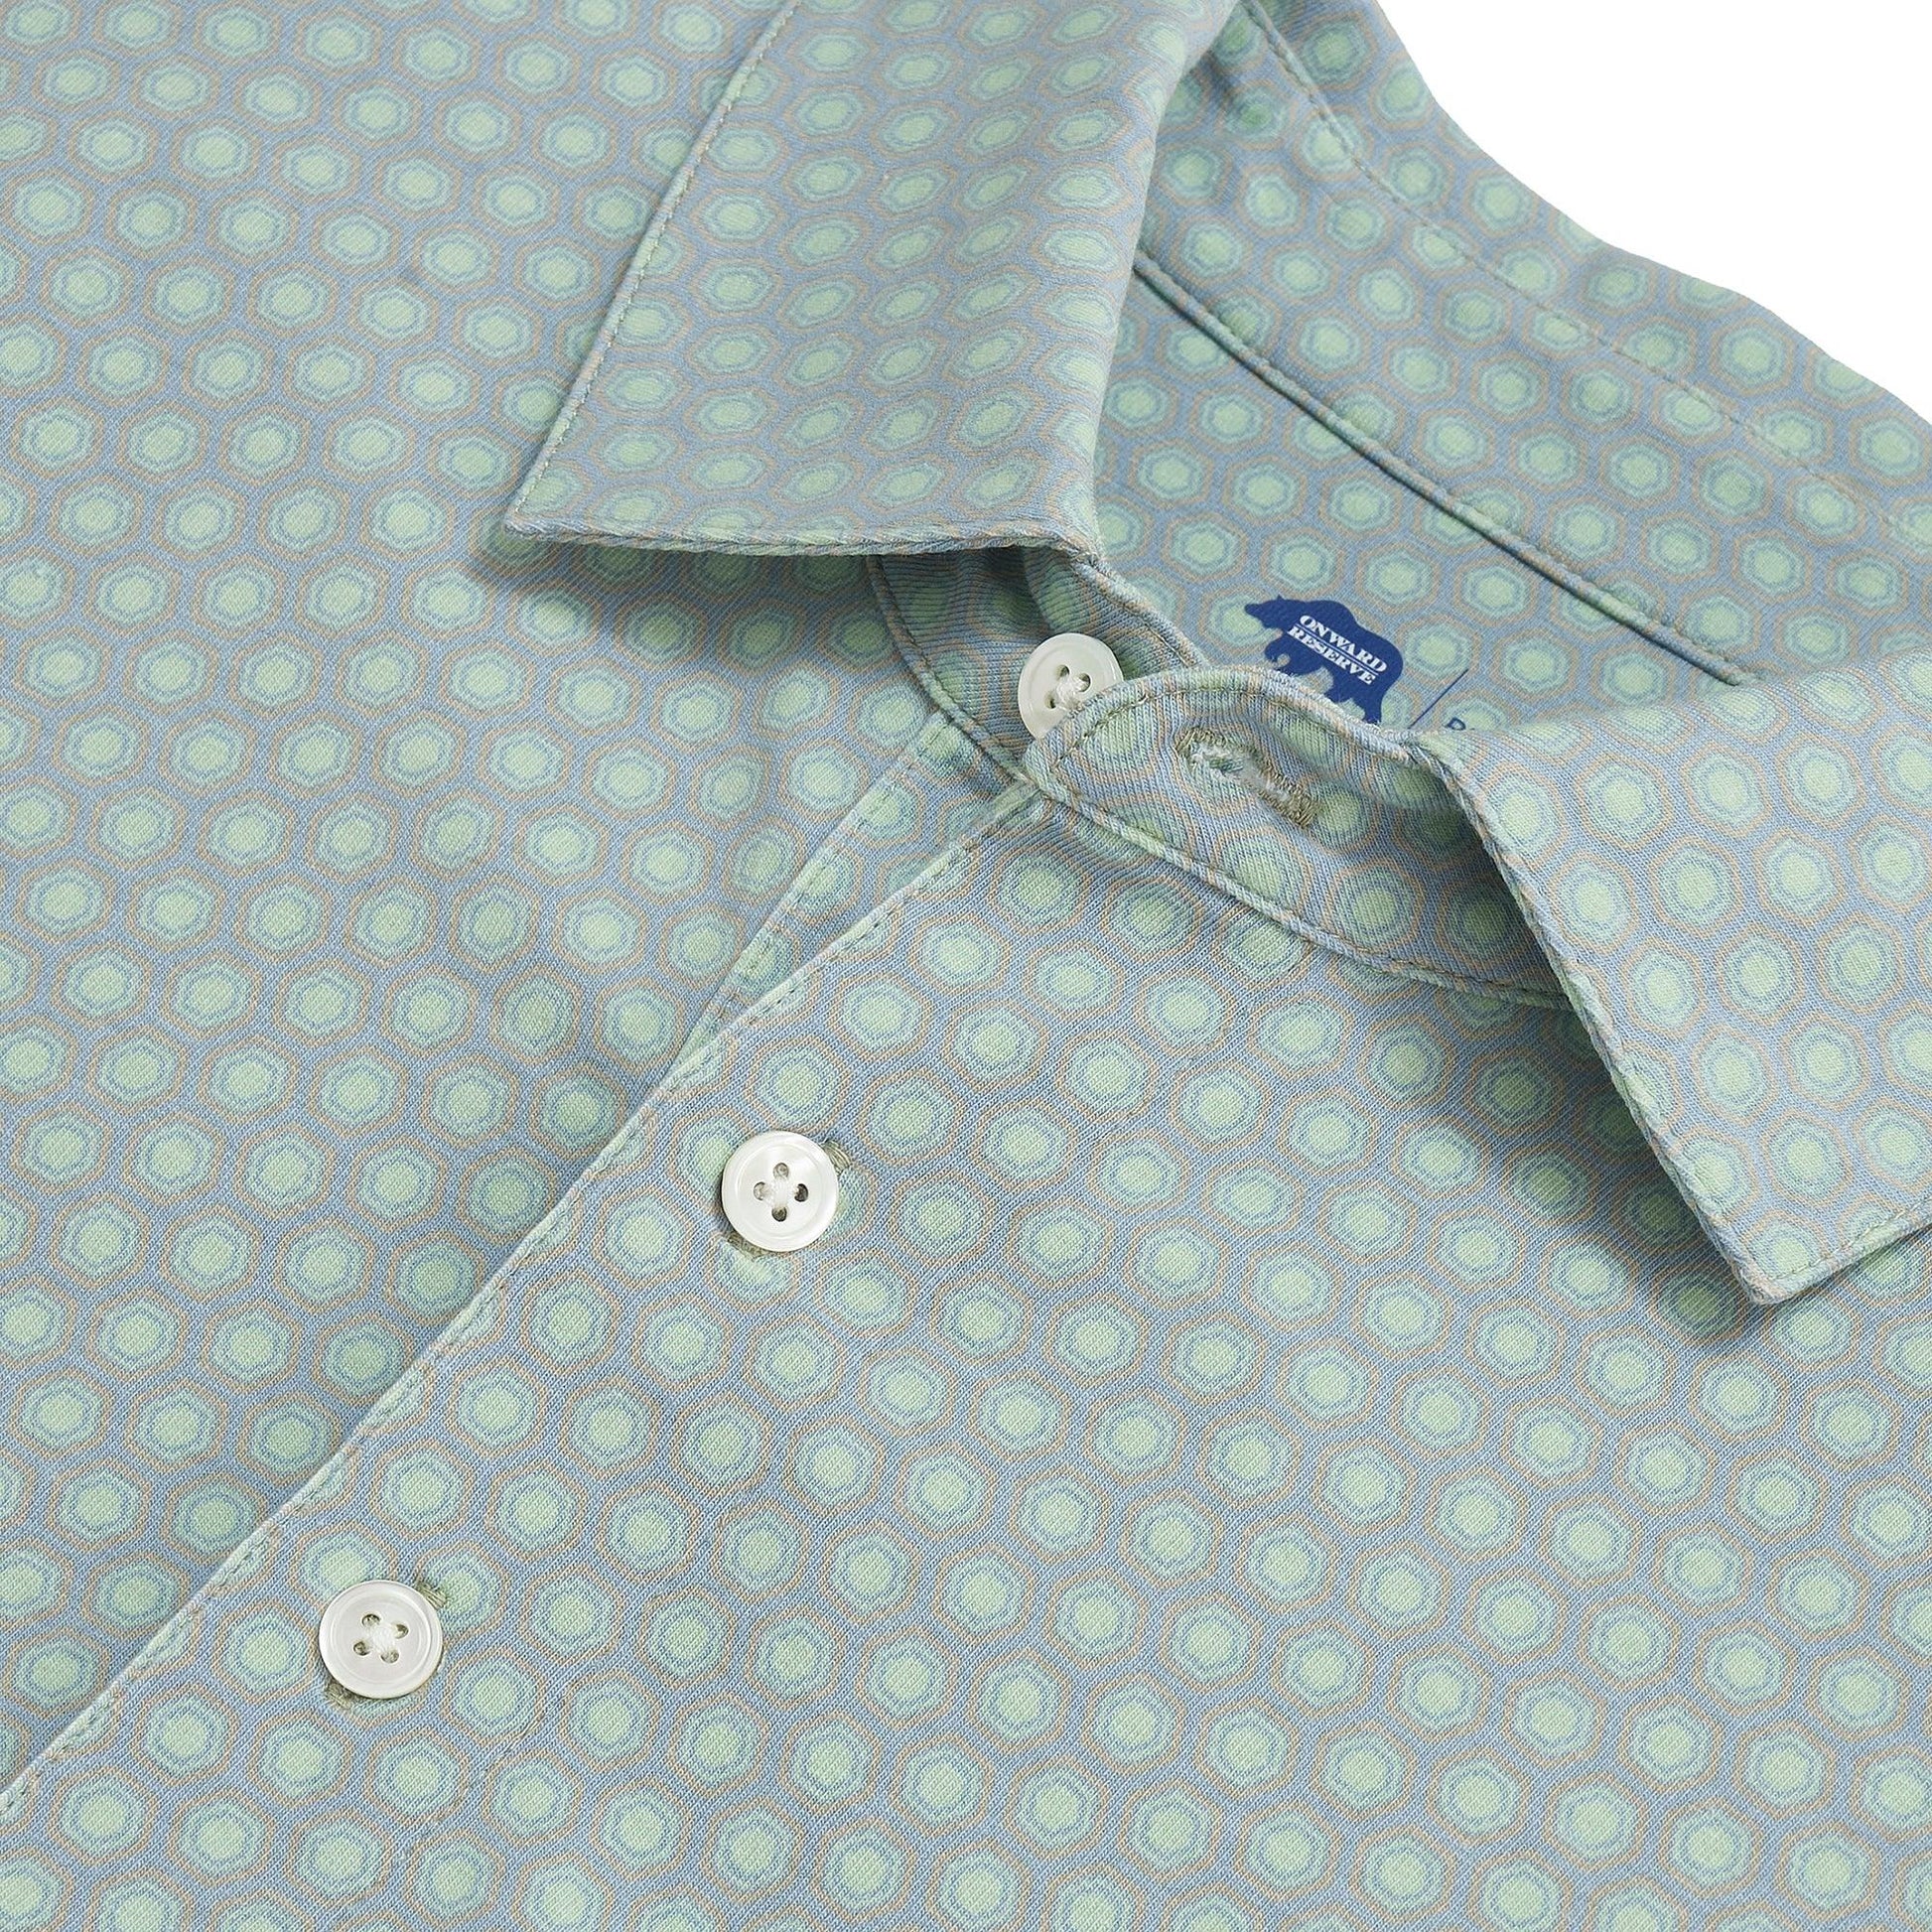 Knotty Printed Icon Polo - Onward Reserve